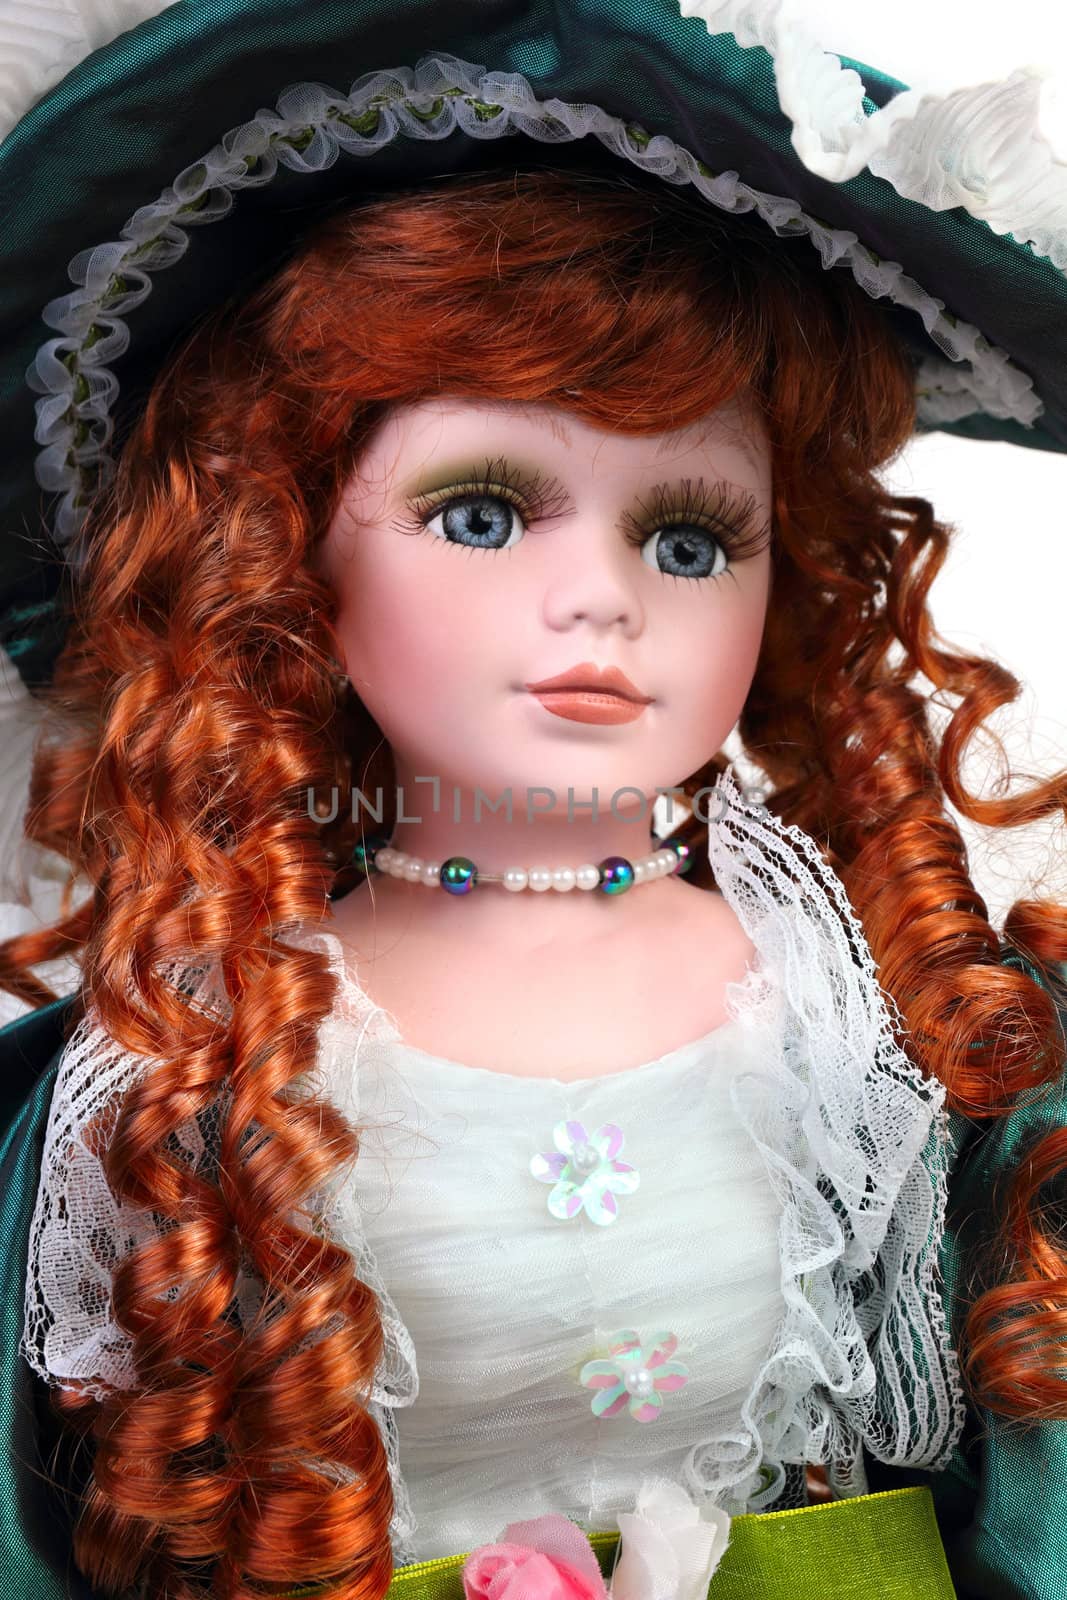 Redhead doll portrait in medieval dress and hat